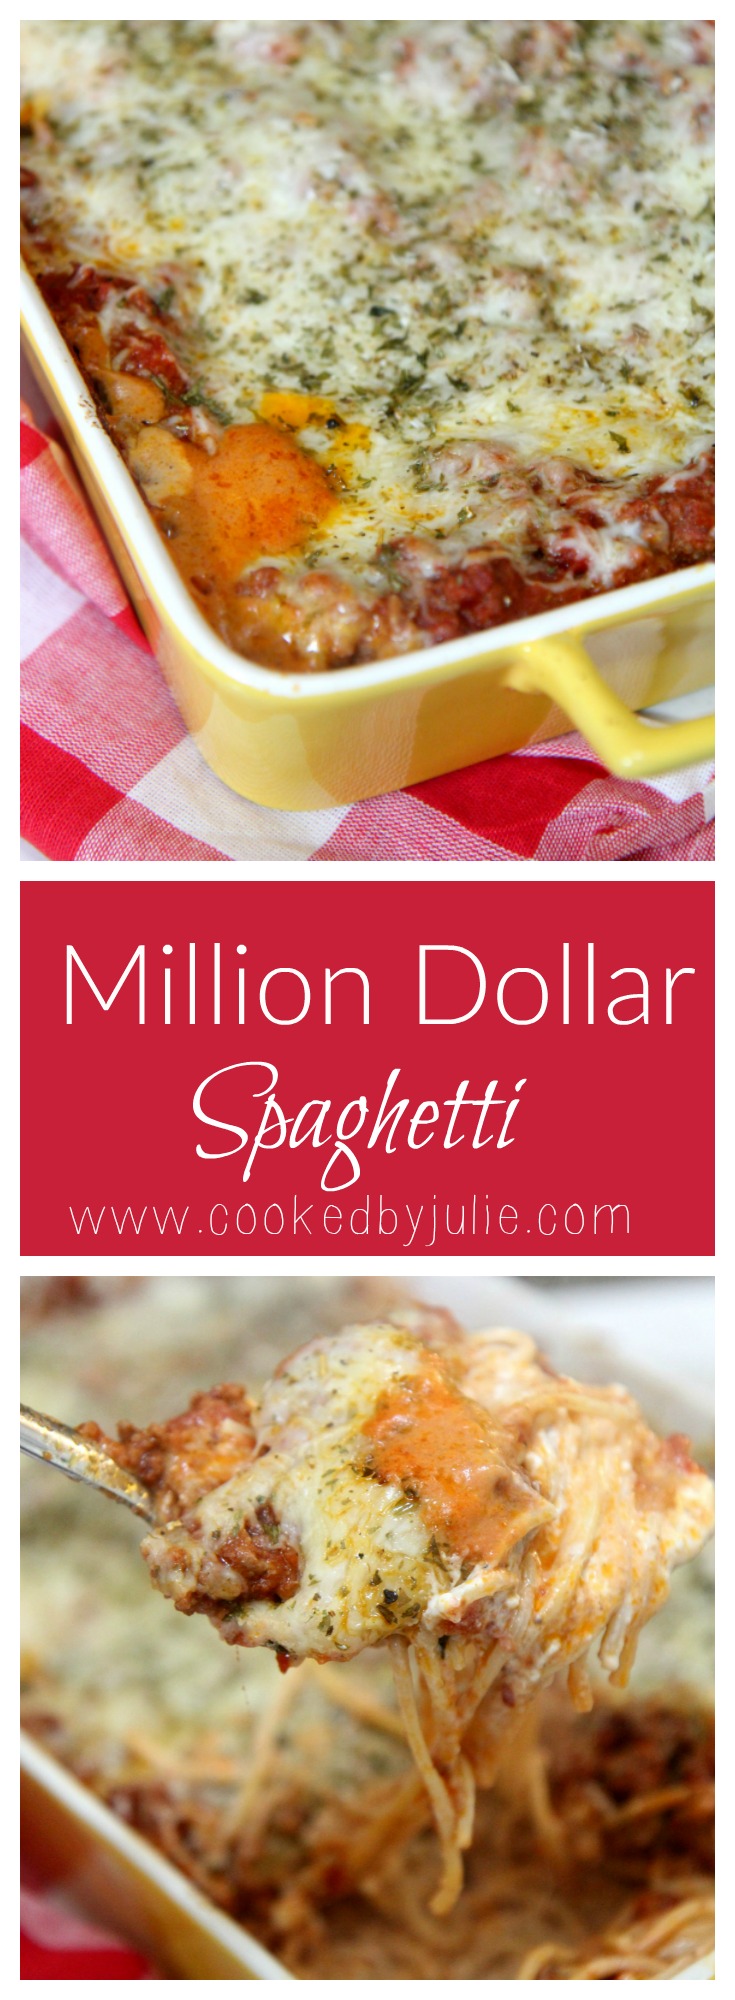 Learn how to make the best spaghetti ever at CookedByJulie.com